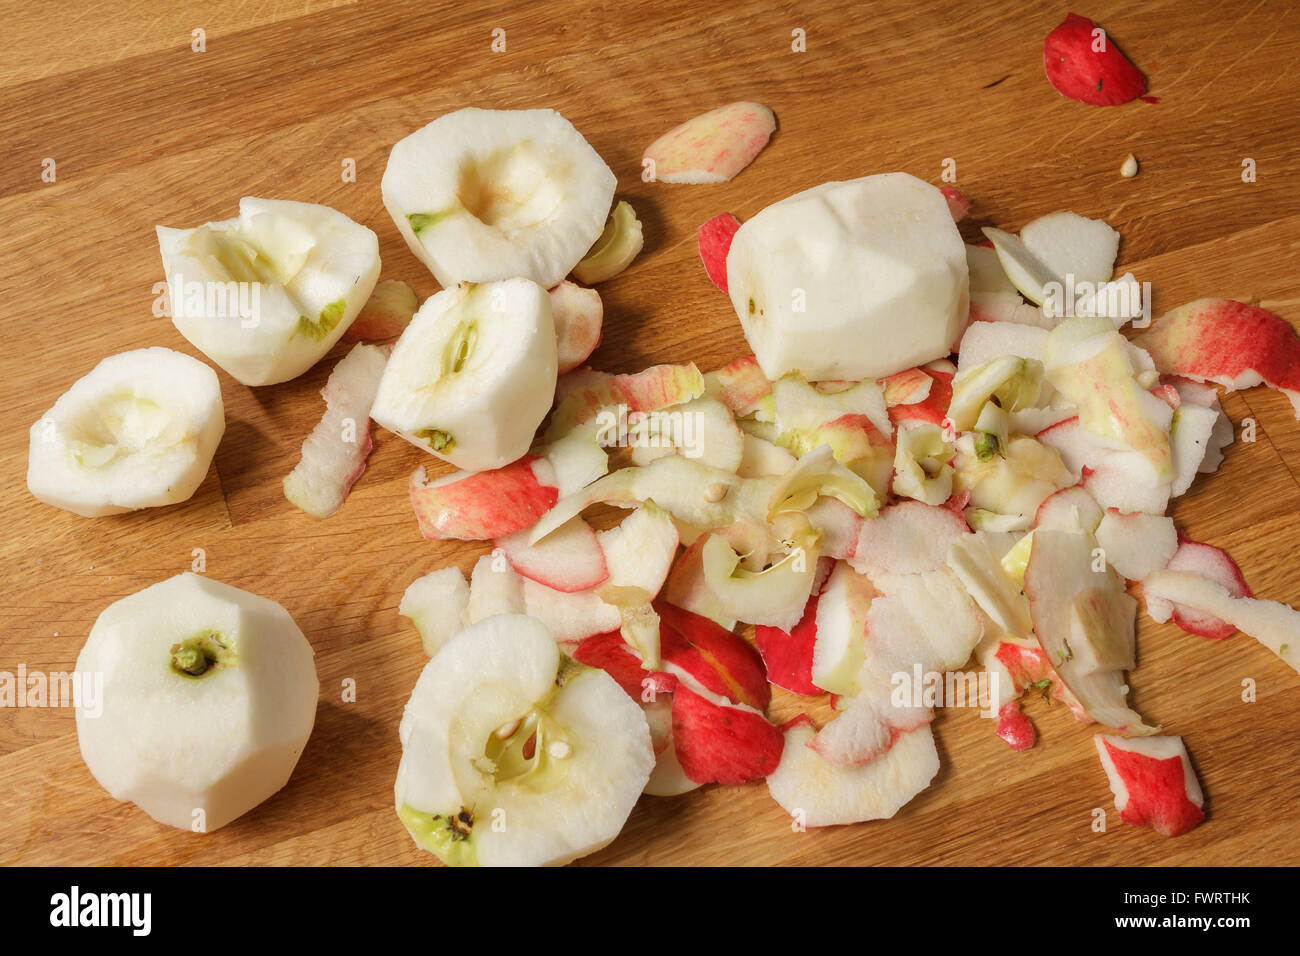 Pile of peeled apples and apple peel on a wooden table Stock Photo